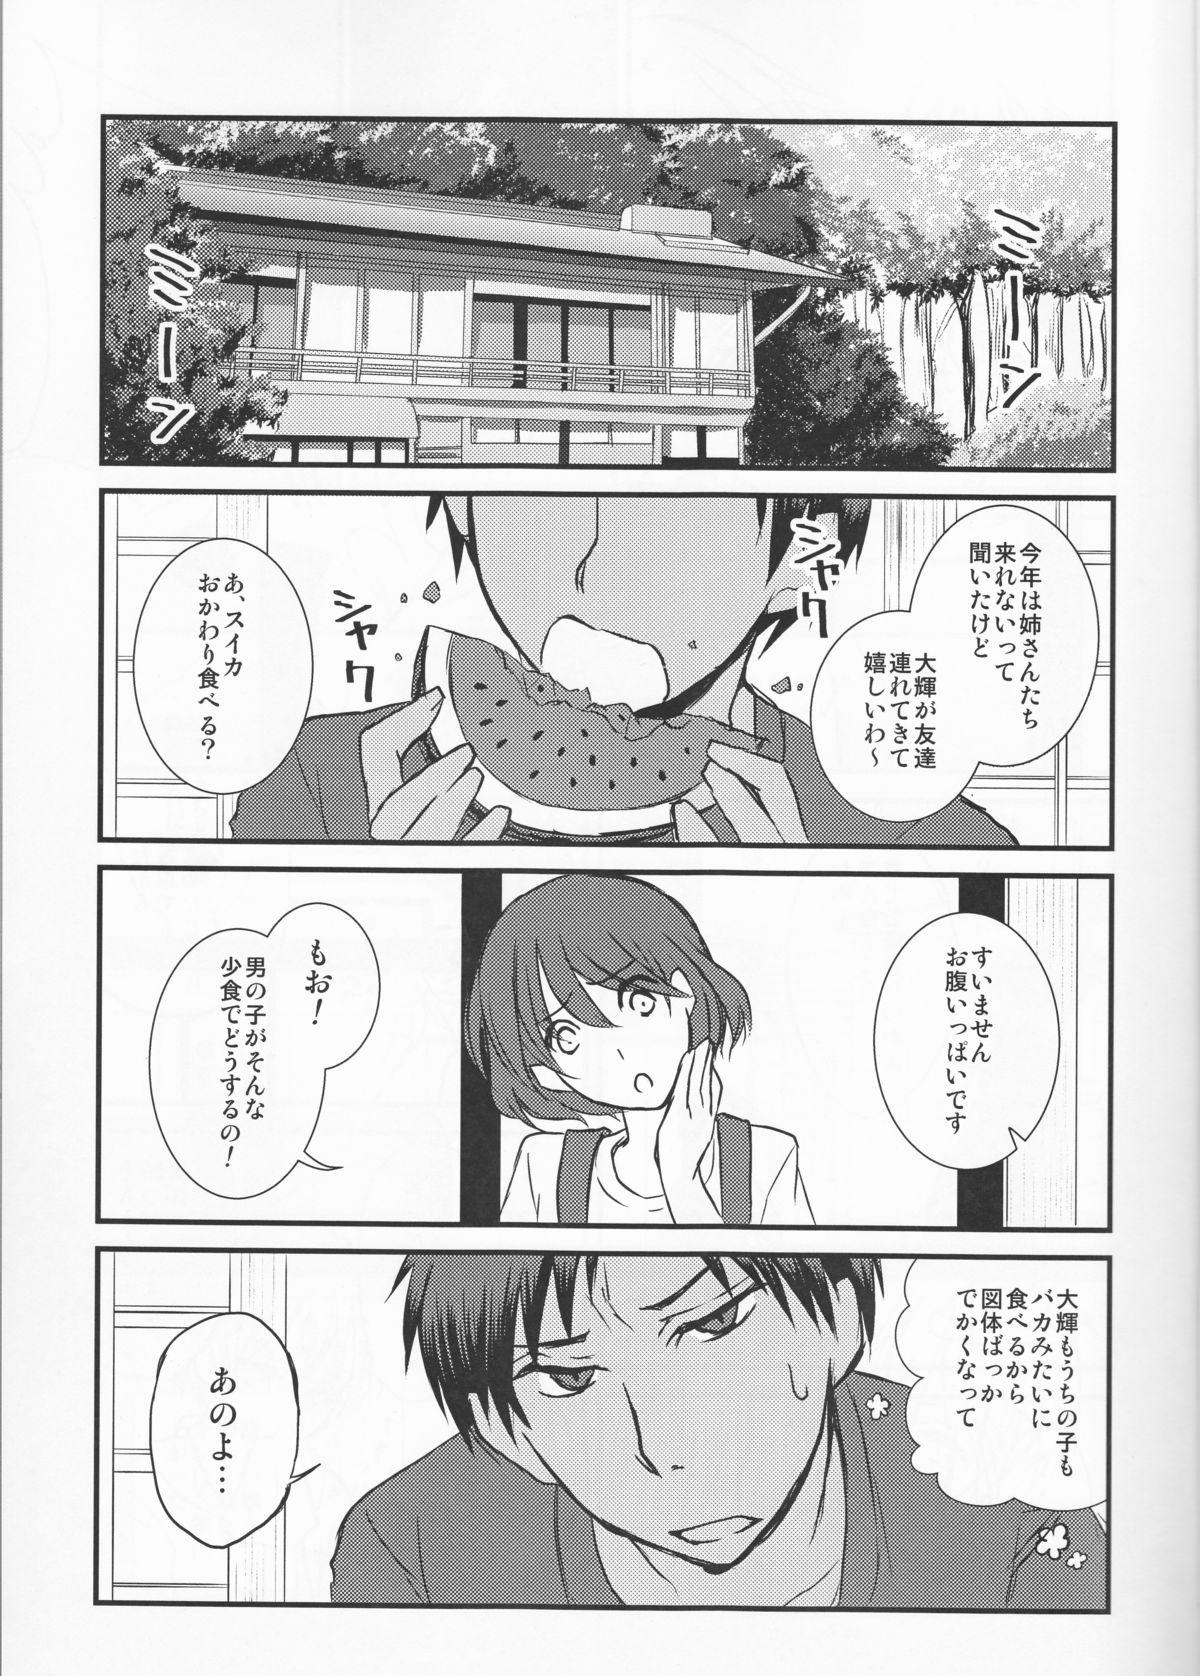 Watersports Yesterday of his and her tomorrow - Kuroko no basuke Pawg - Page 3